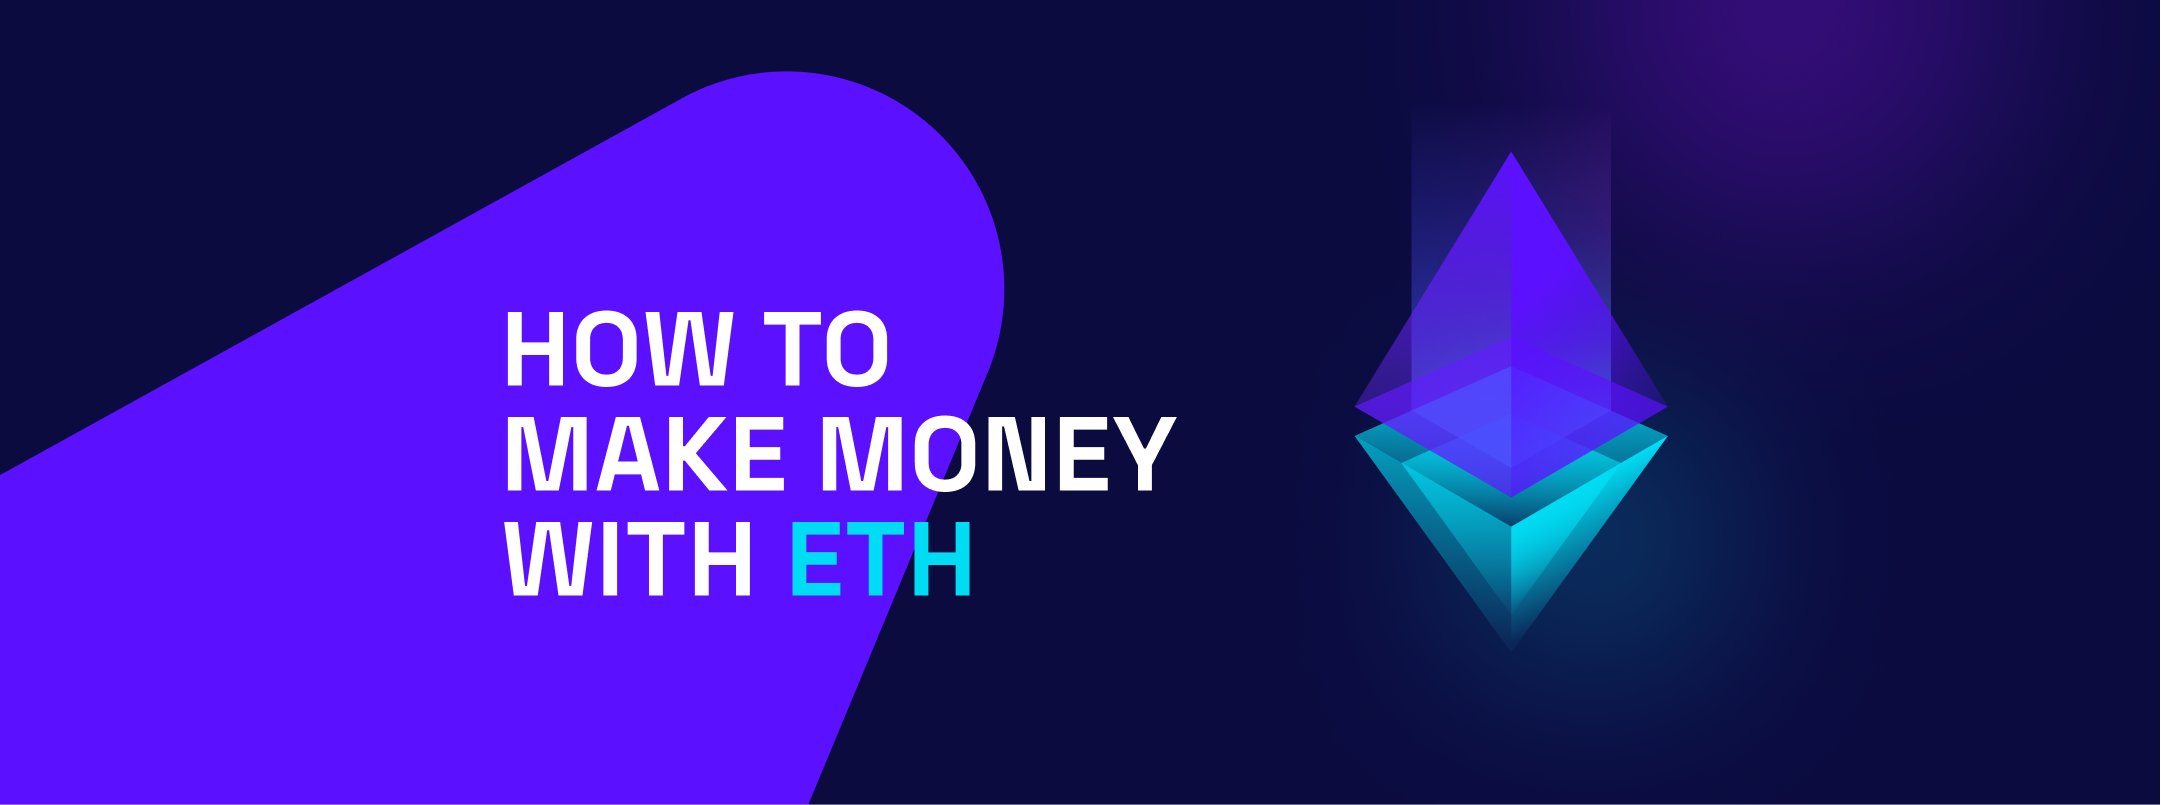 How to Make Money With an Ethereum Node | More Than Finances